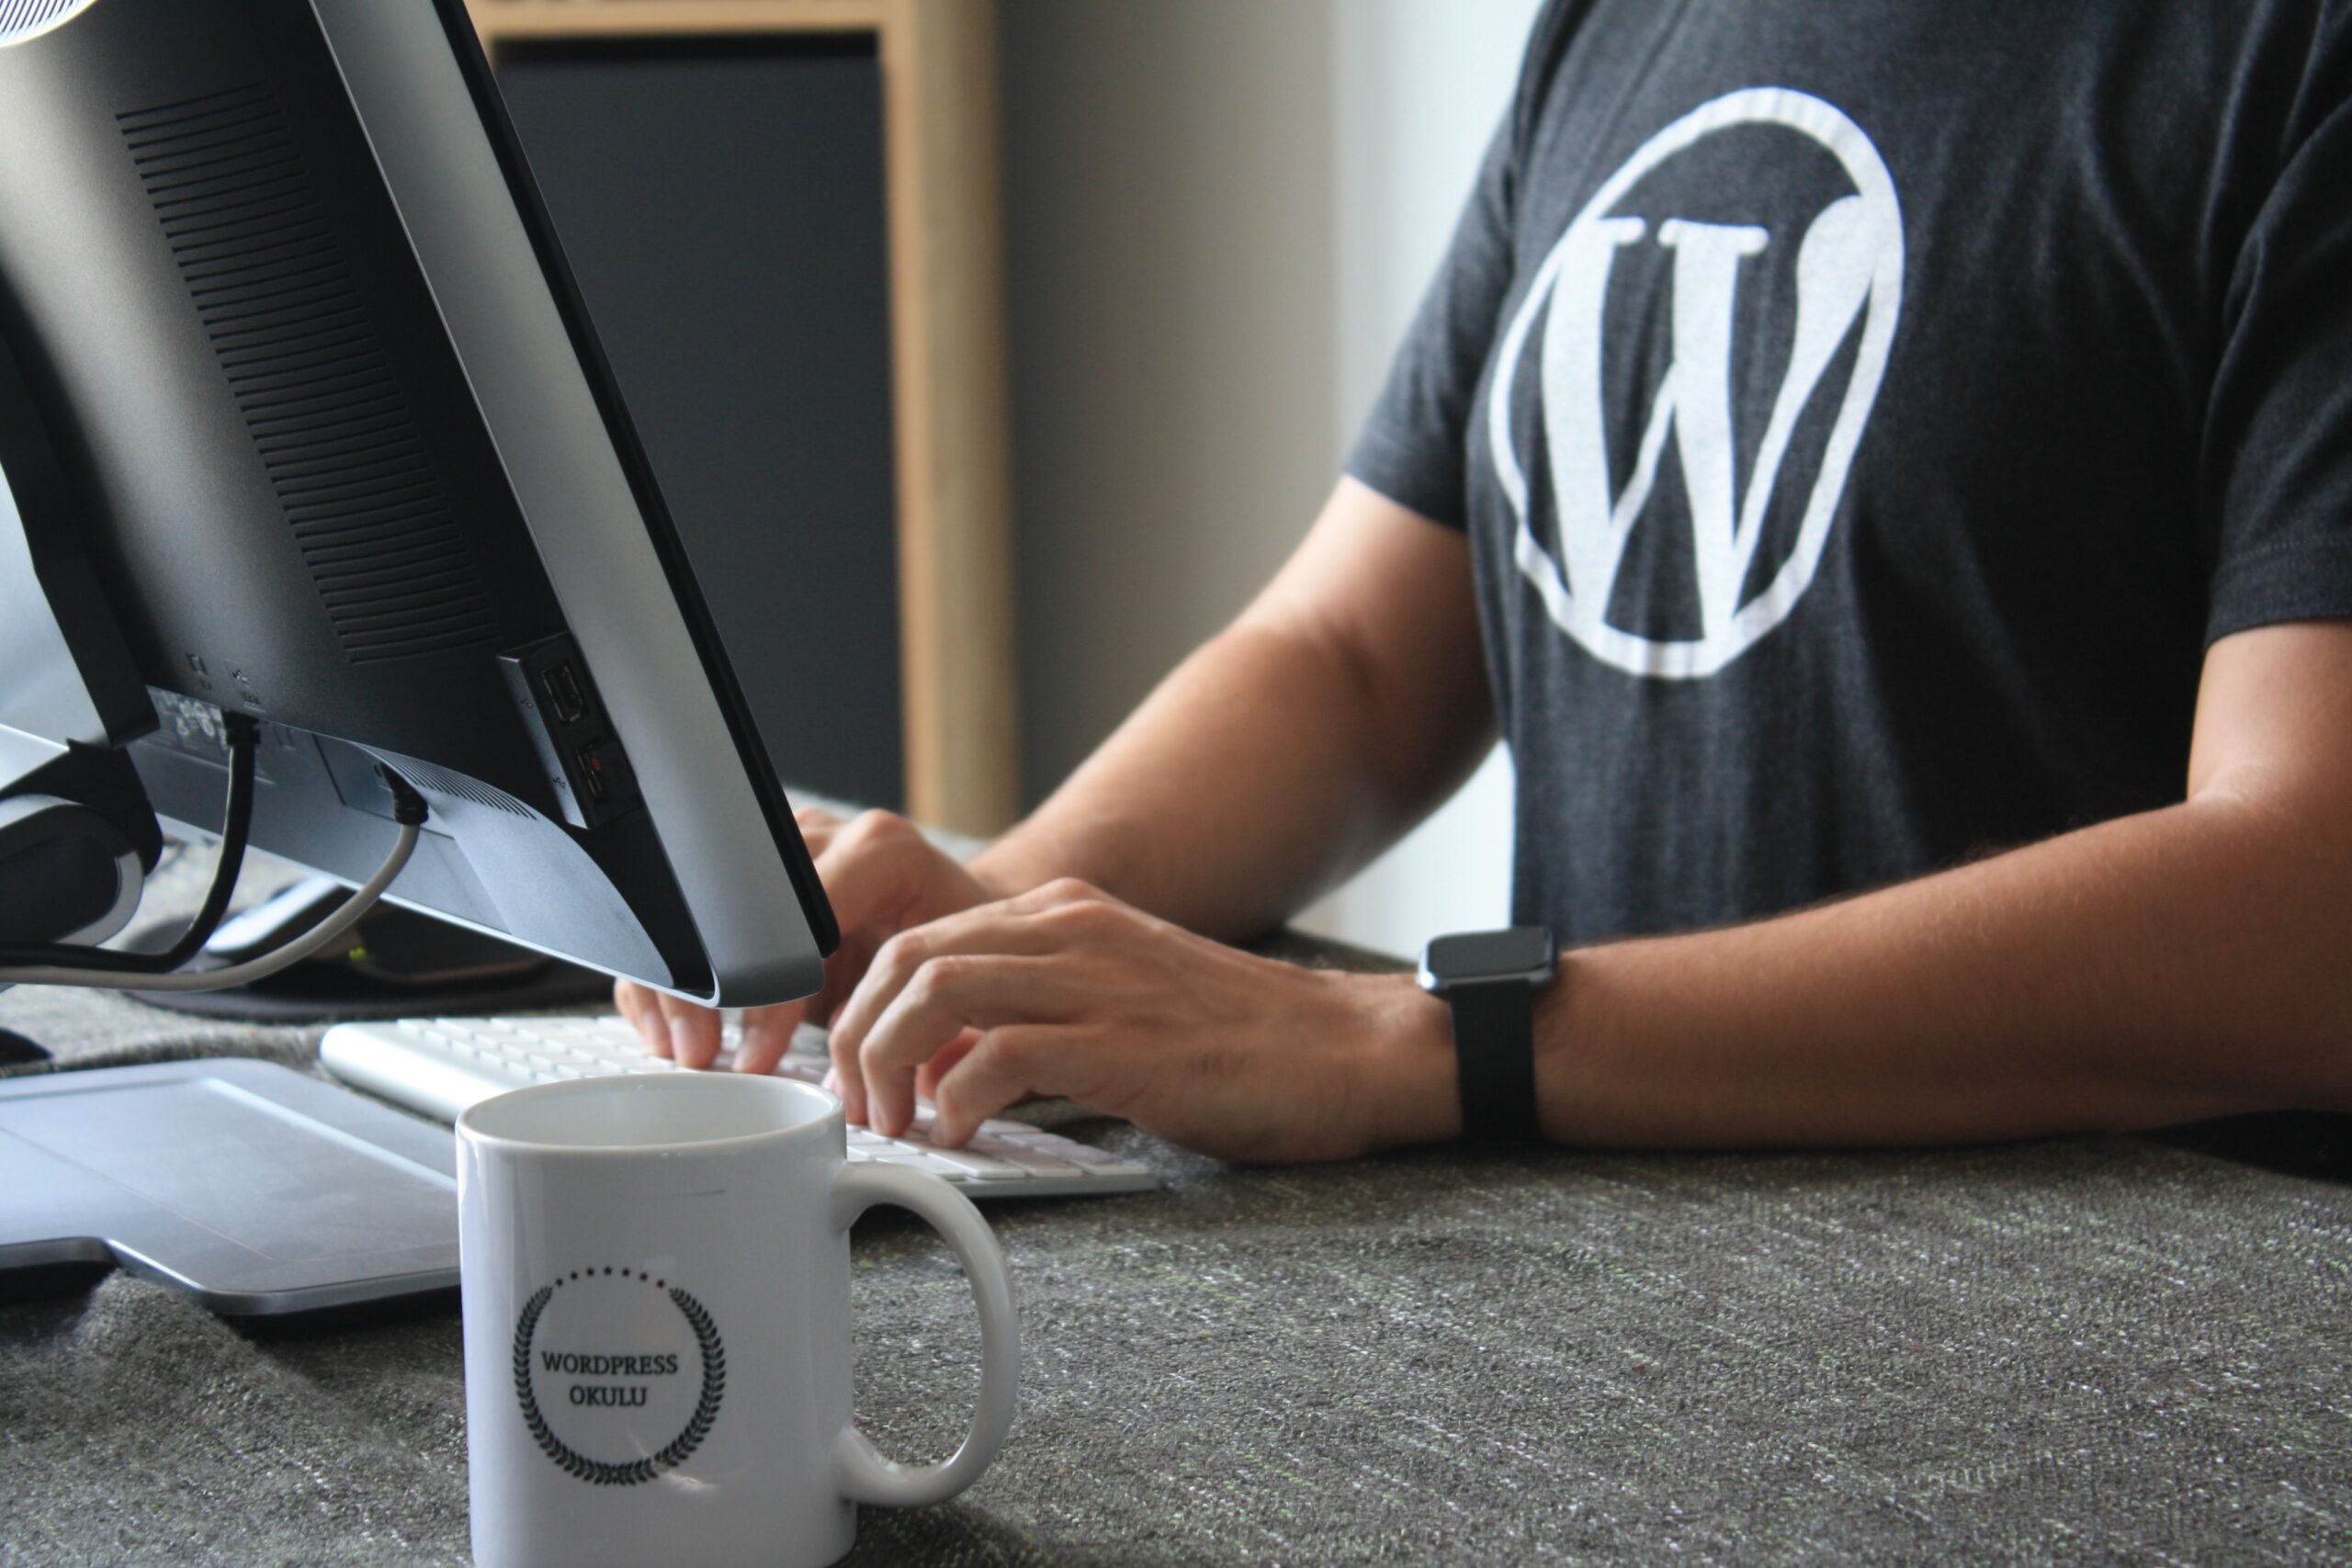 Why We Are Moving Everything to WordPress